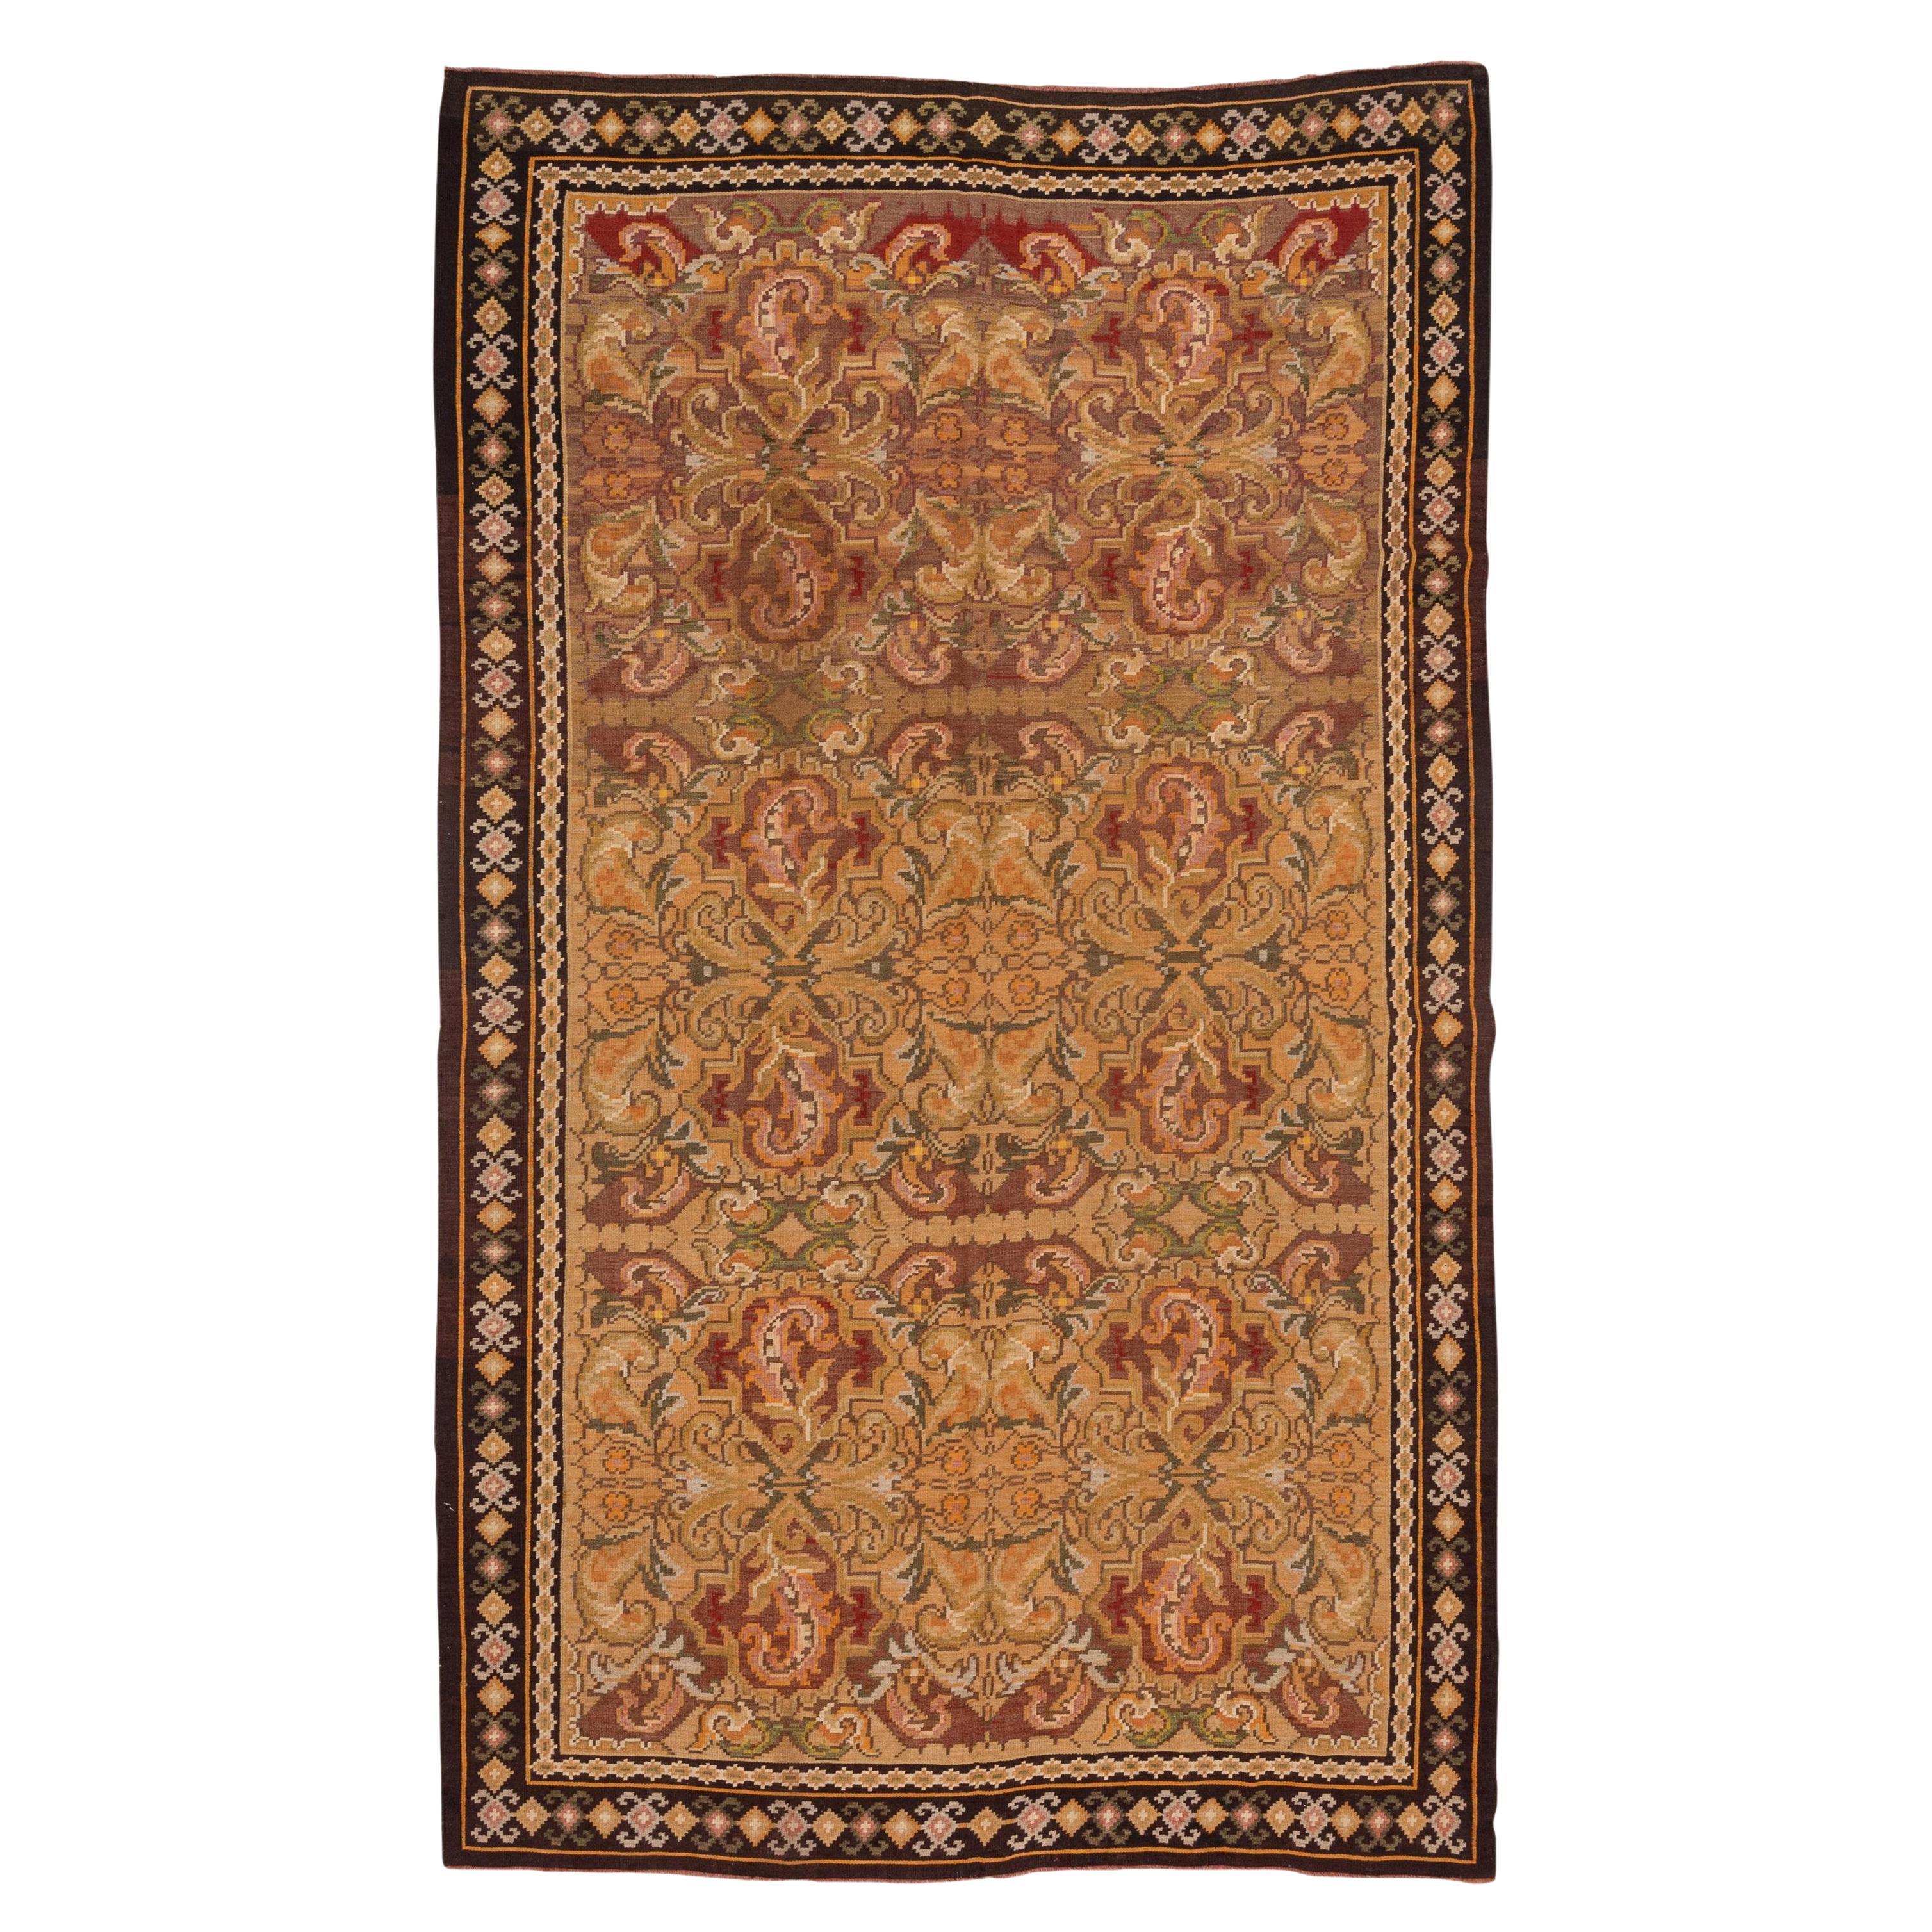 Antique Hand Woven Russian Besserabian Rug, circa 1900s For Sale